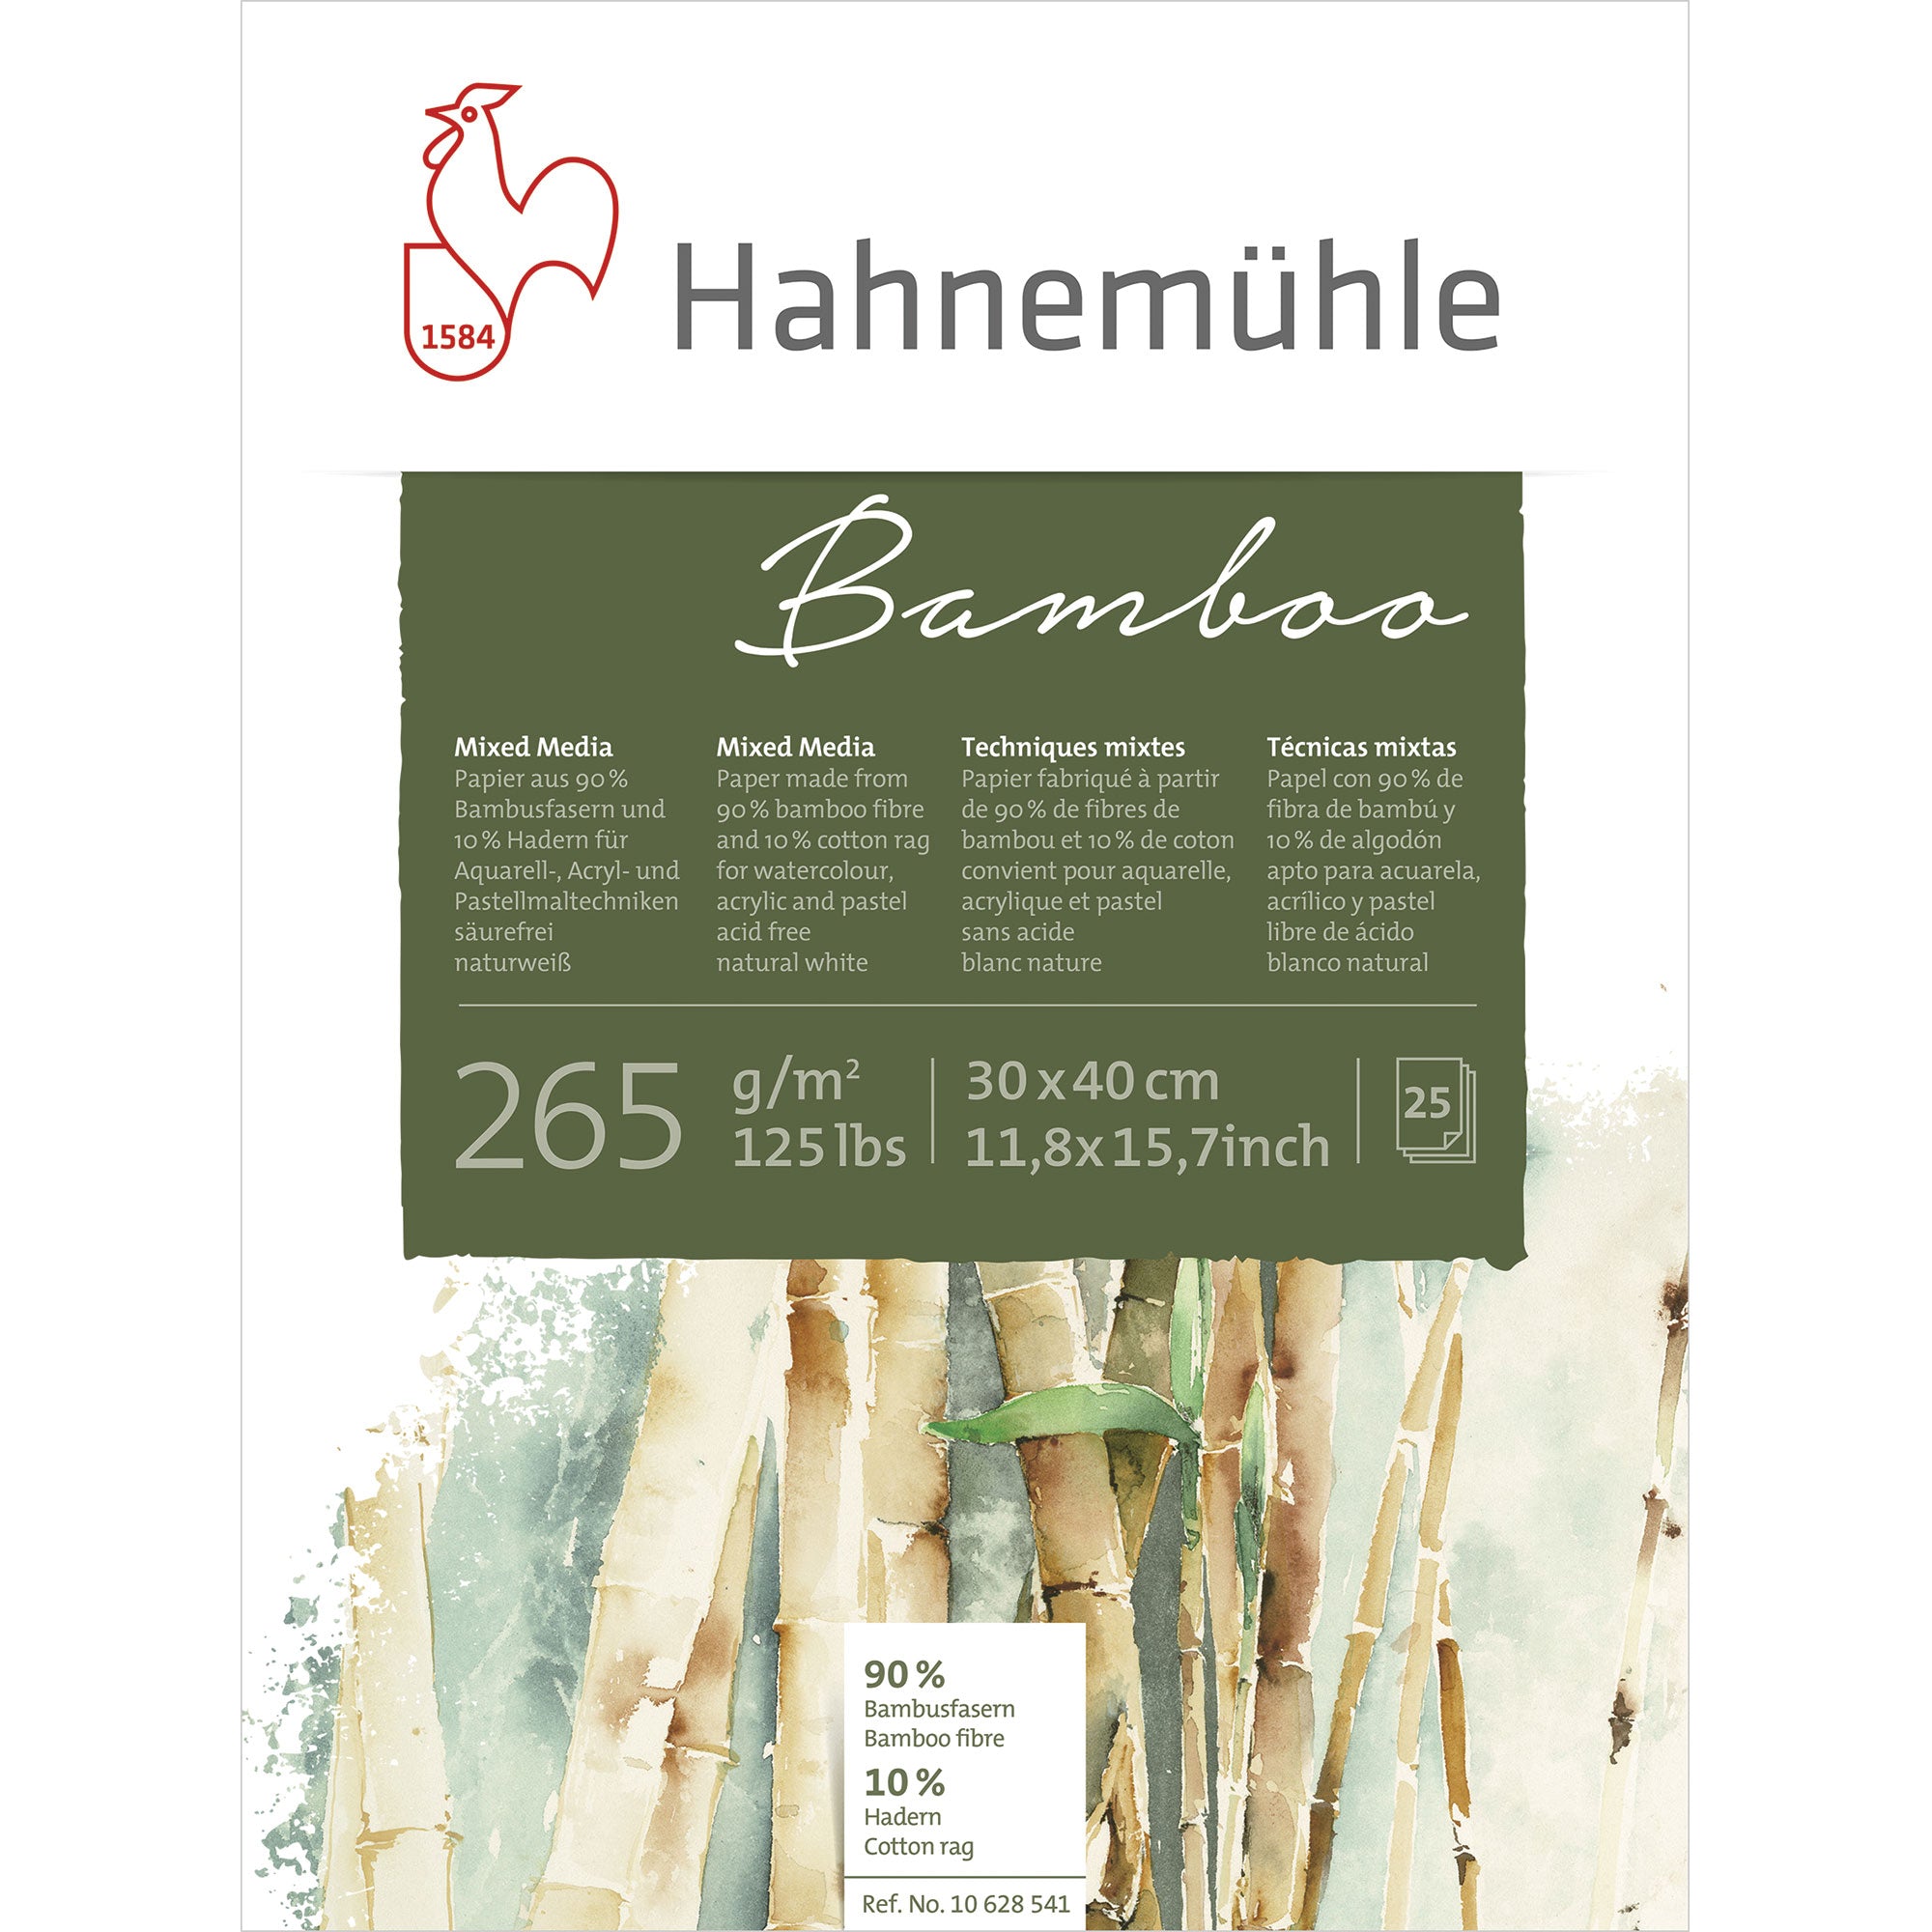 Hahnemühle Bamboo Mixed Media Paper Pads - 30x40cm